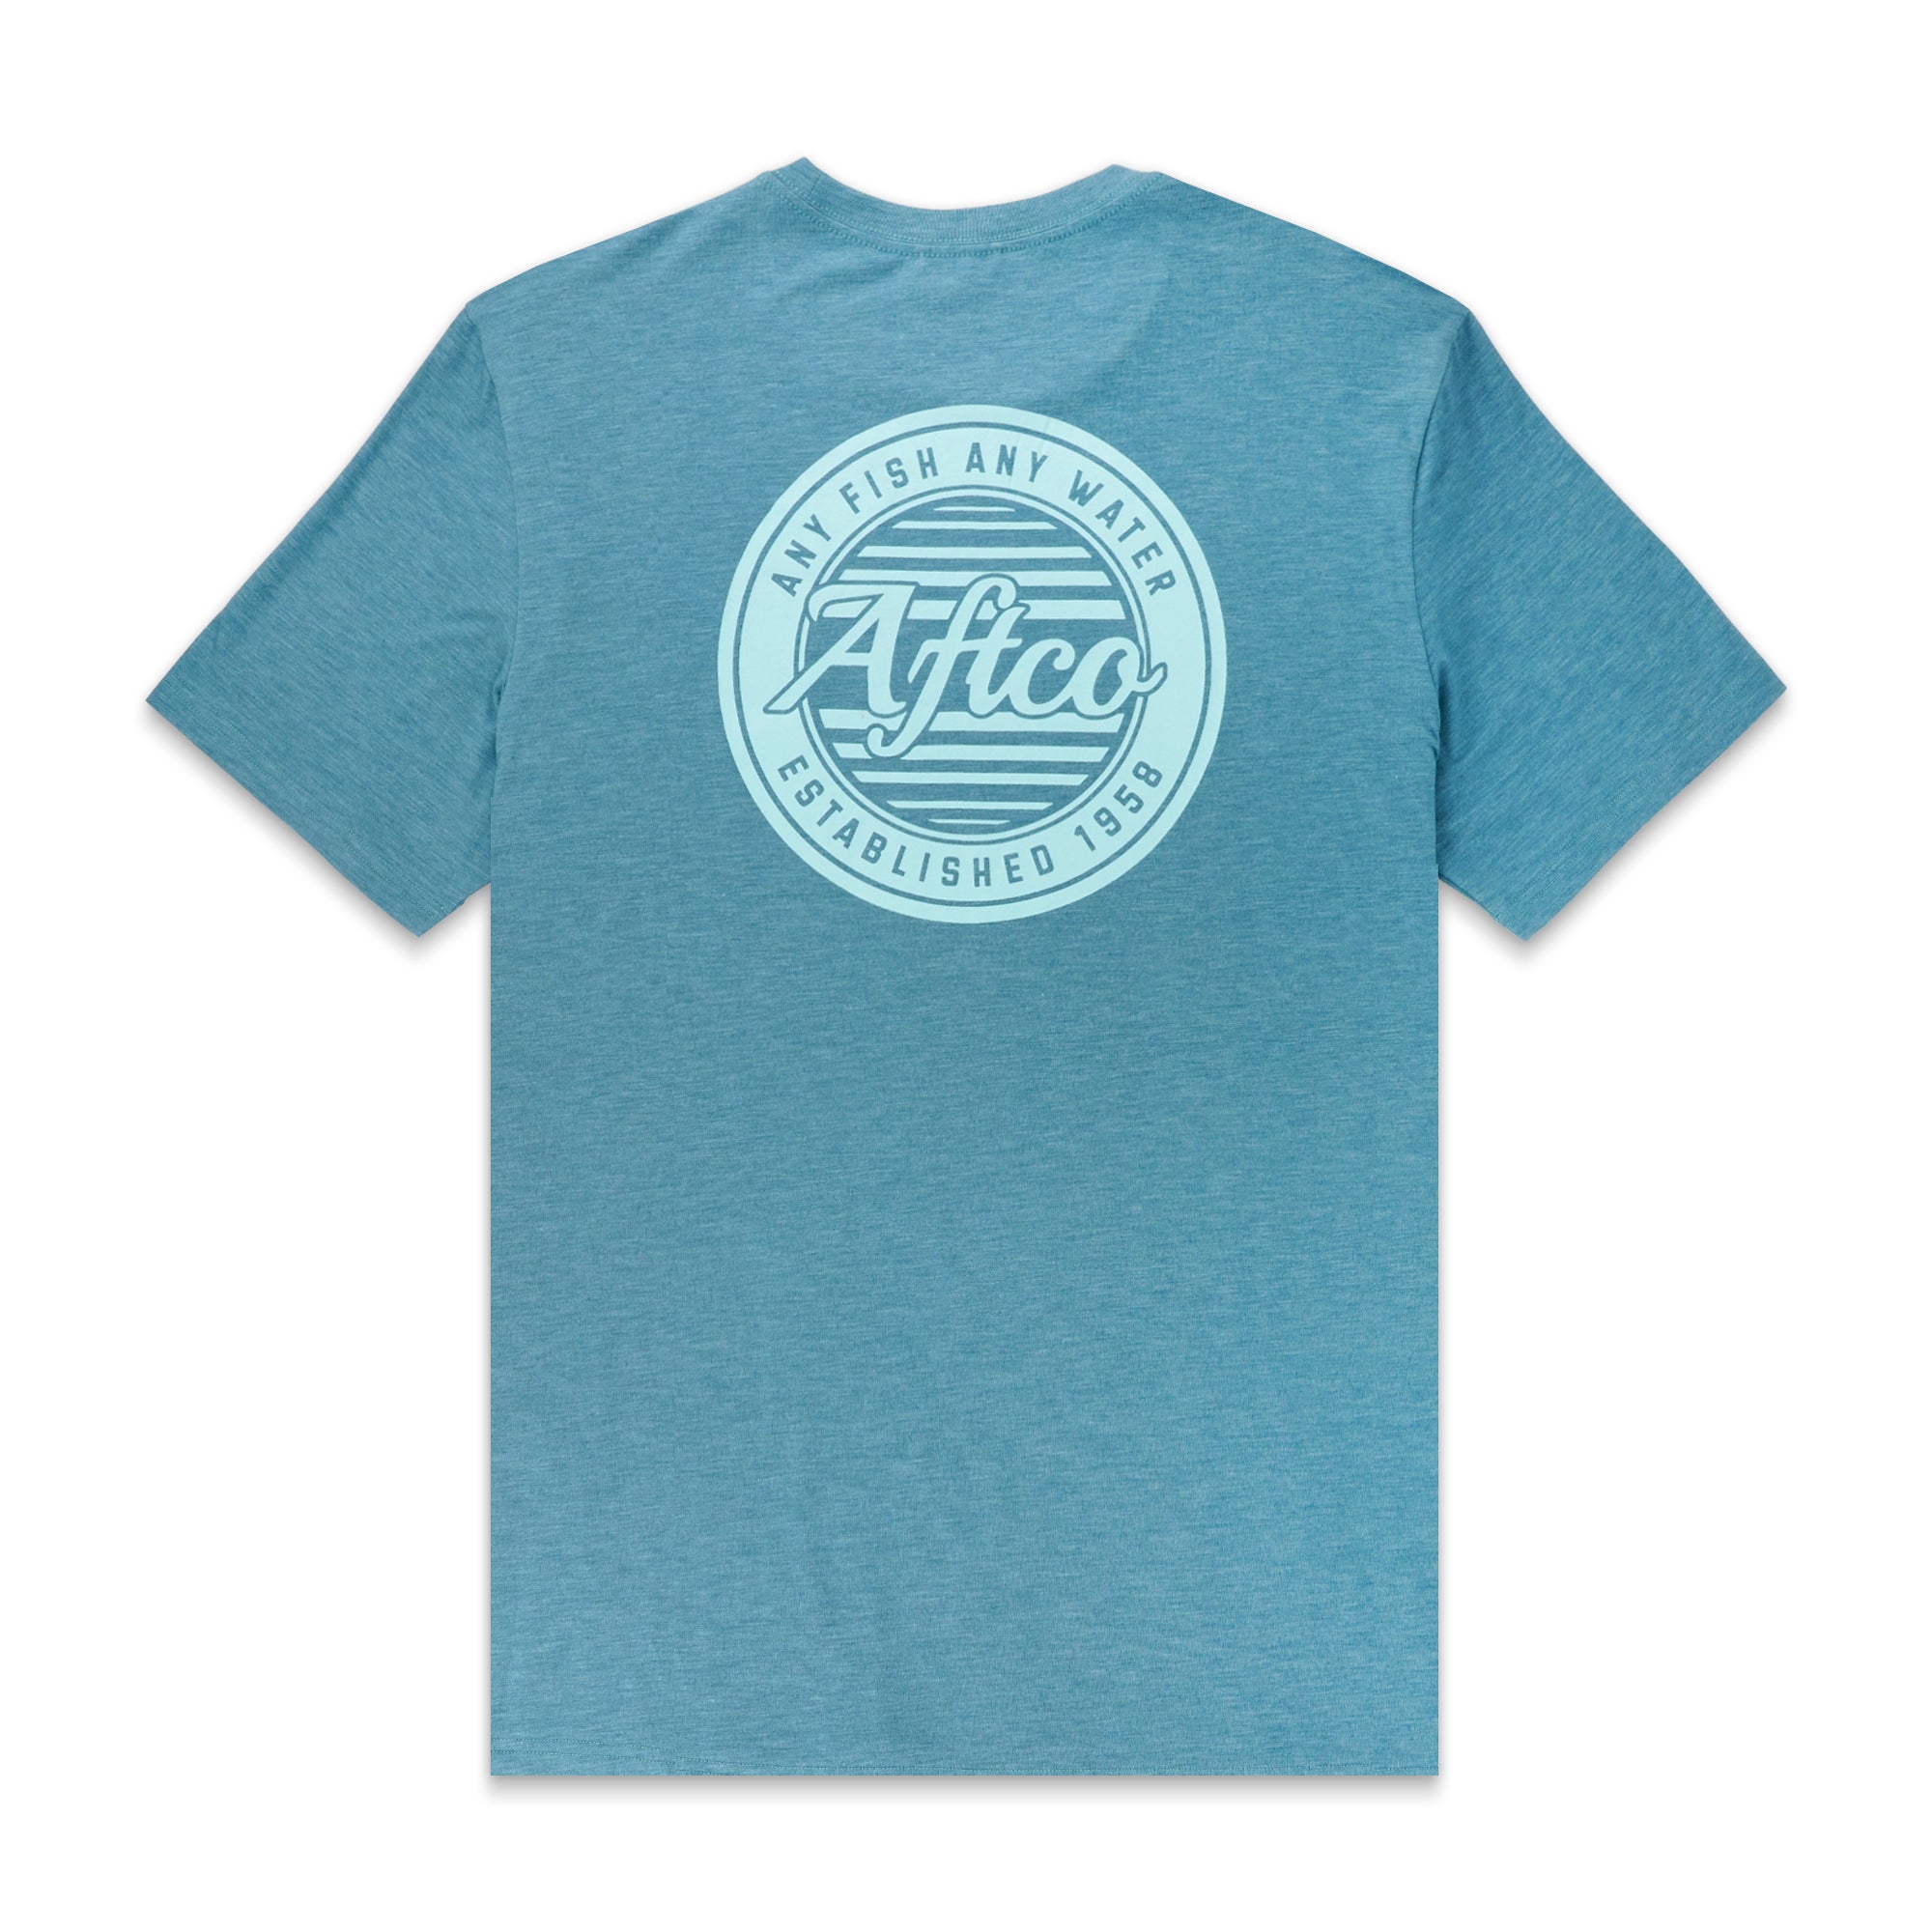 AFTCO Ocean Bound UPF SS Shirt - Arctic Heather Small